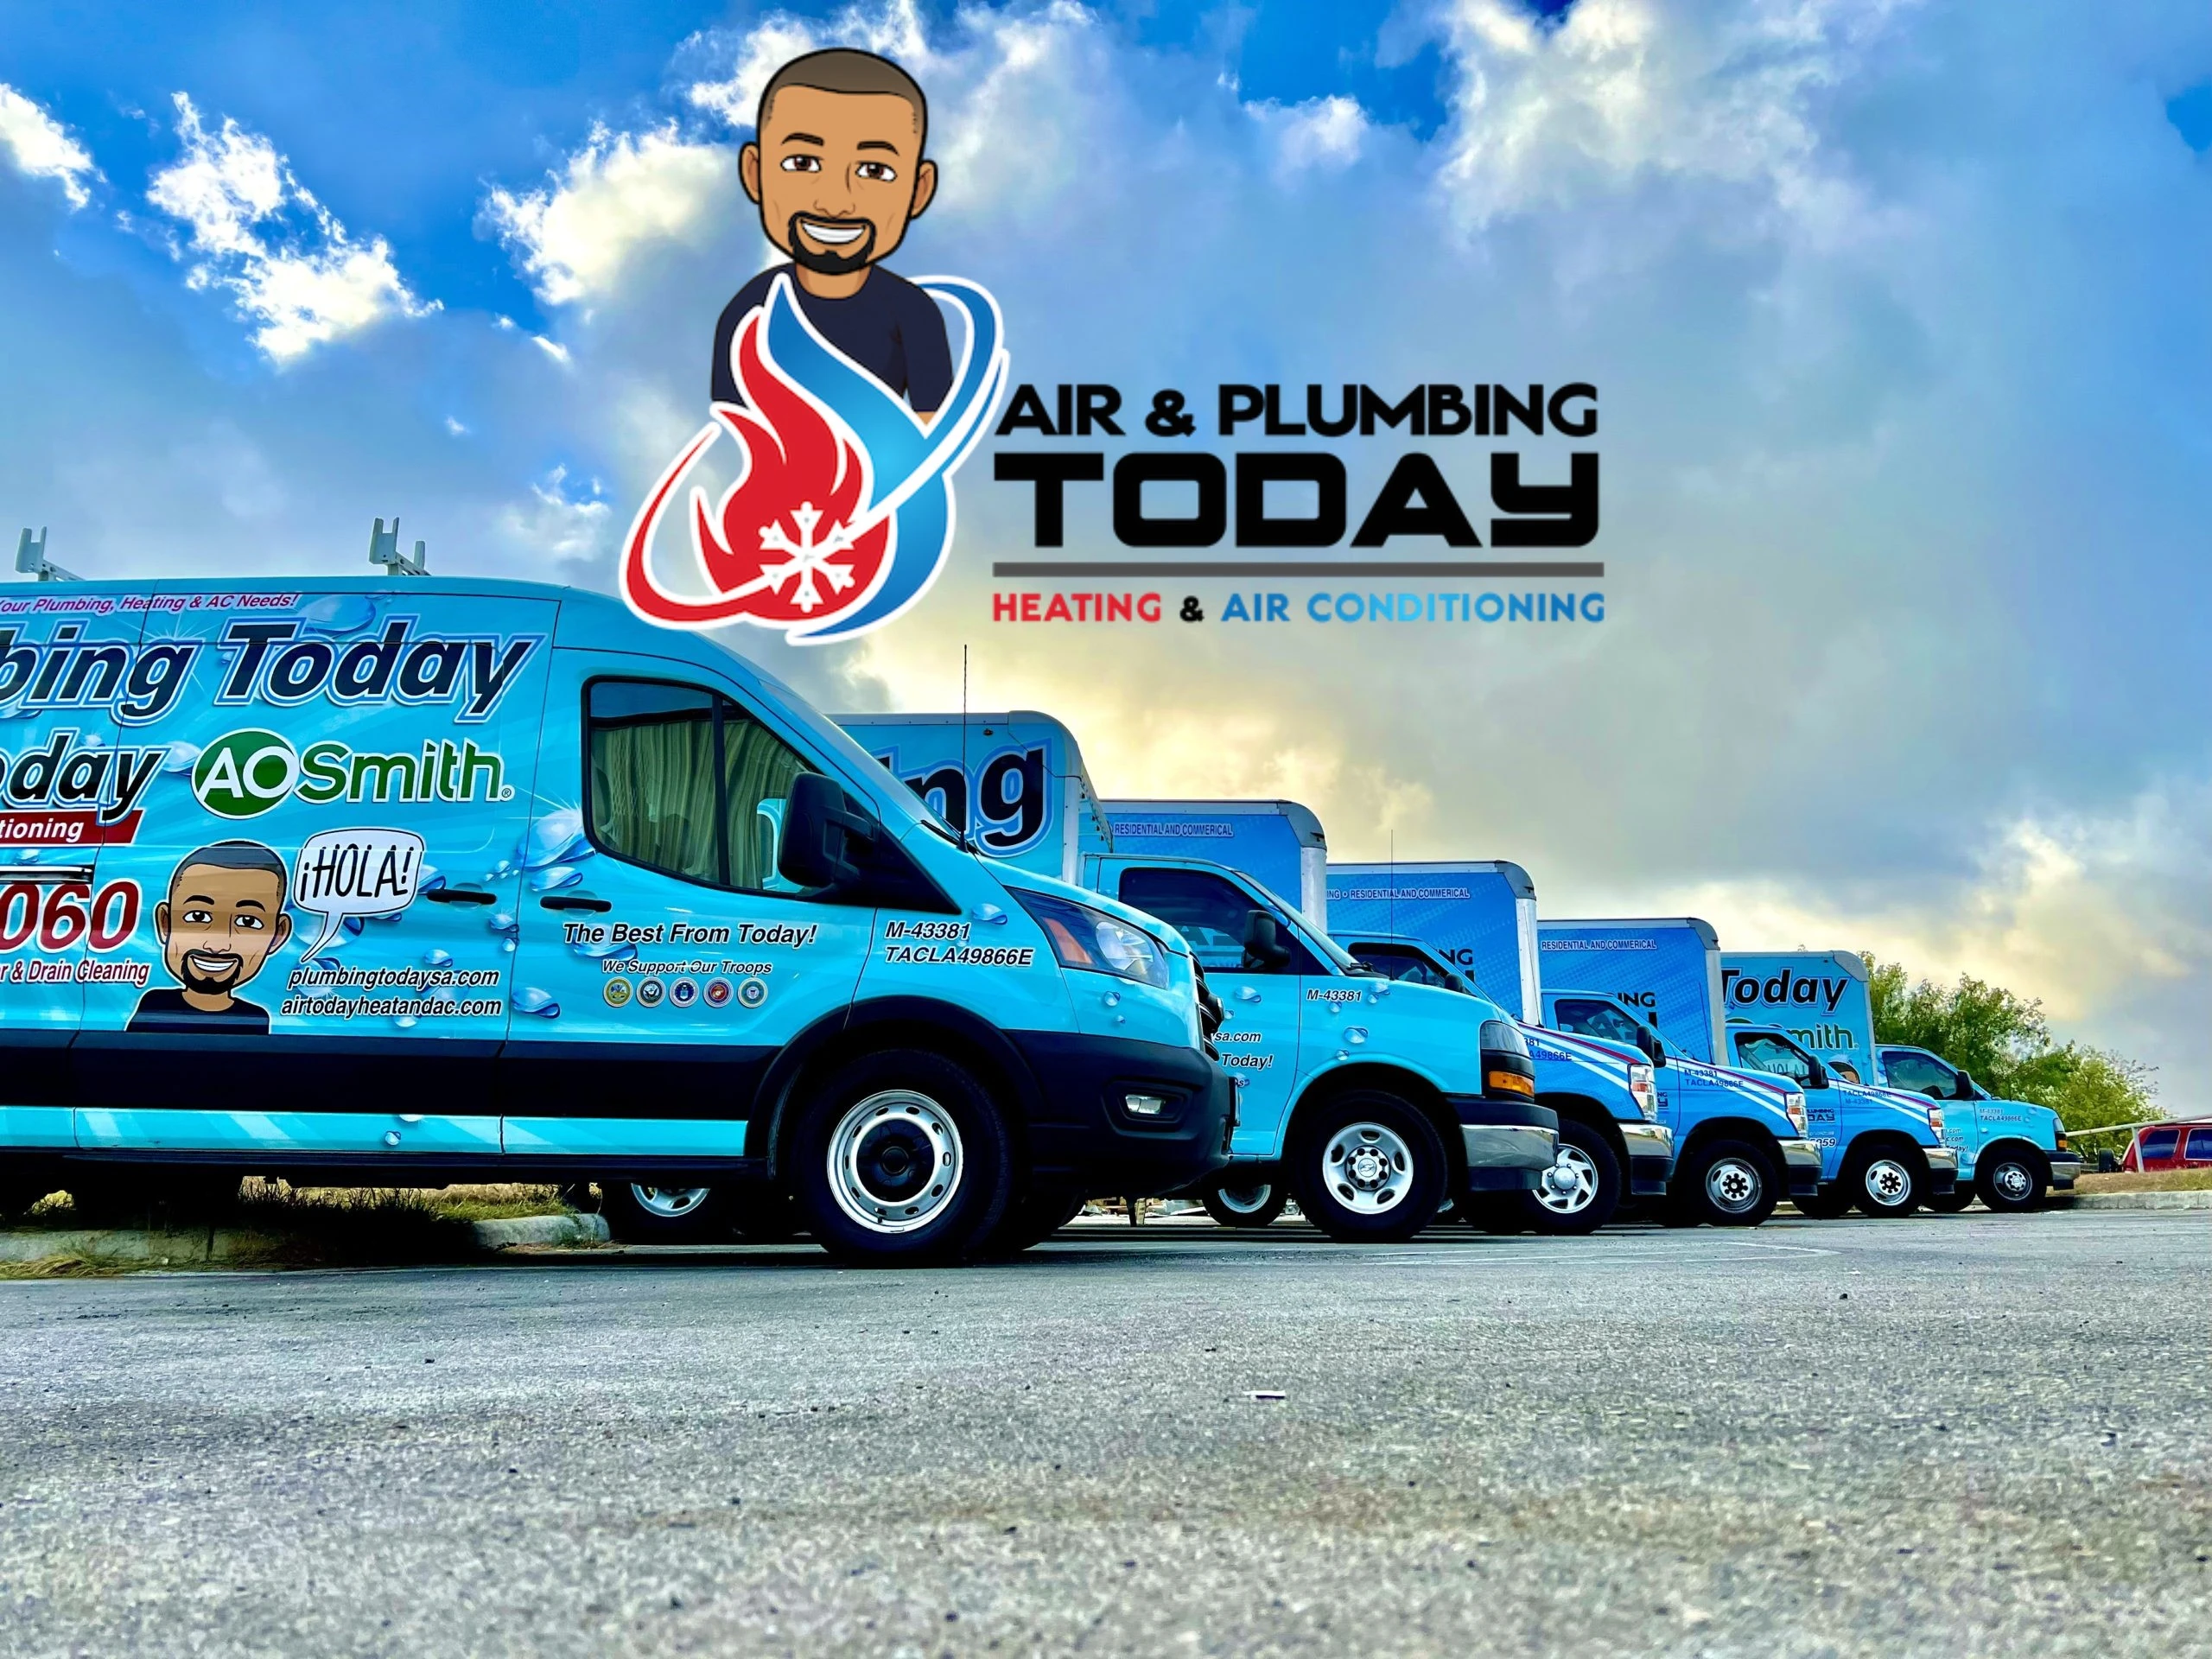 air-and-plumbing-today-hvac-air-conidtioning-technicians-plumbers-san-antonio-tx-vehicle